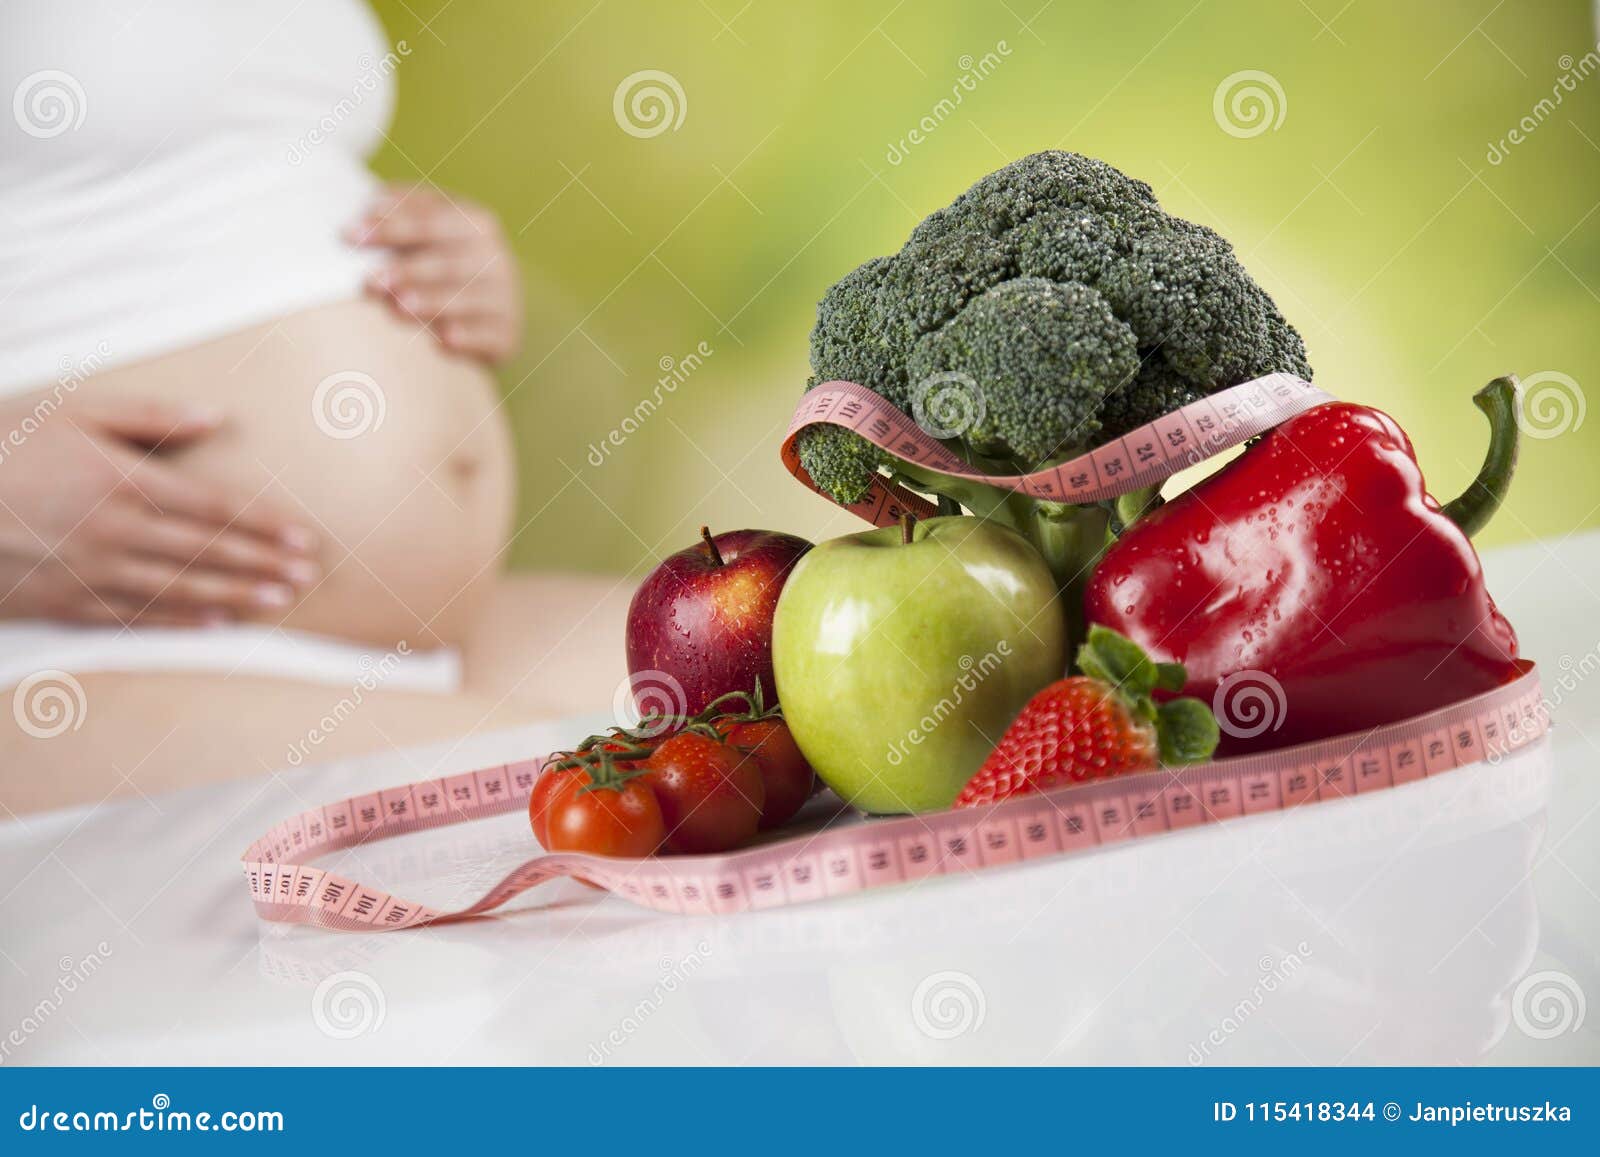 Nutrition And Diet During Pregnancy, Fruits And Vegetables ...